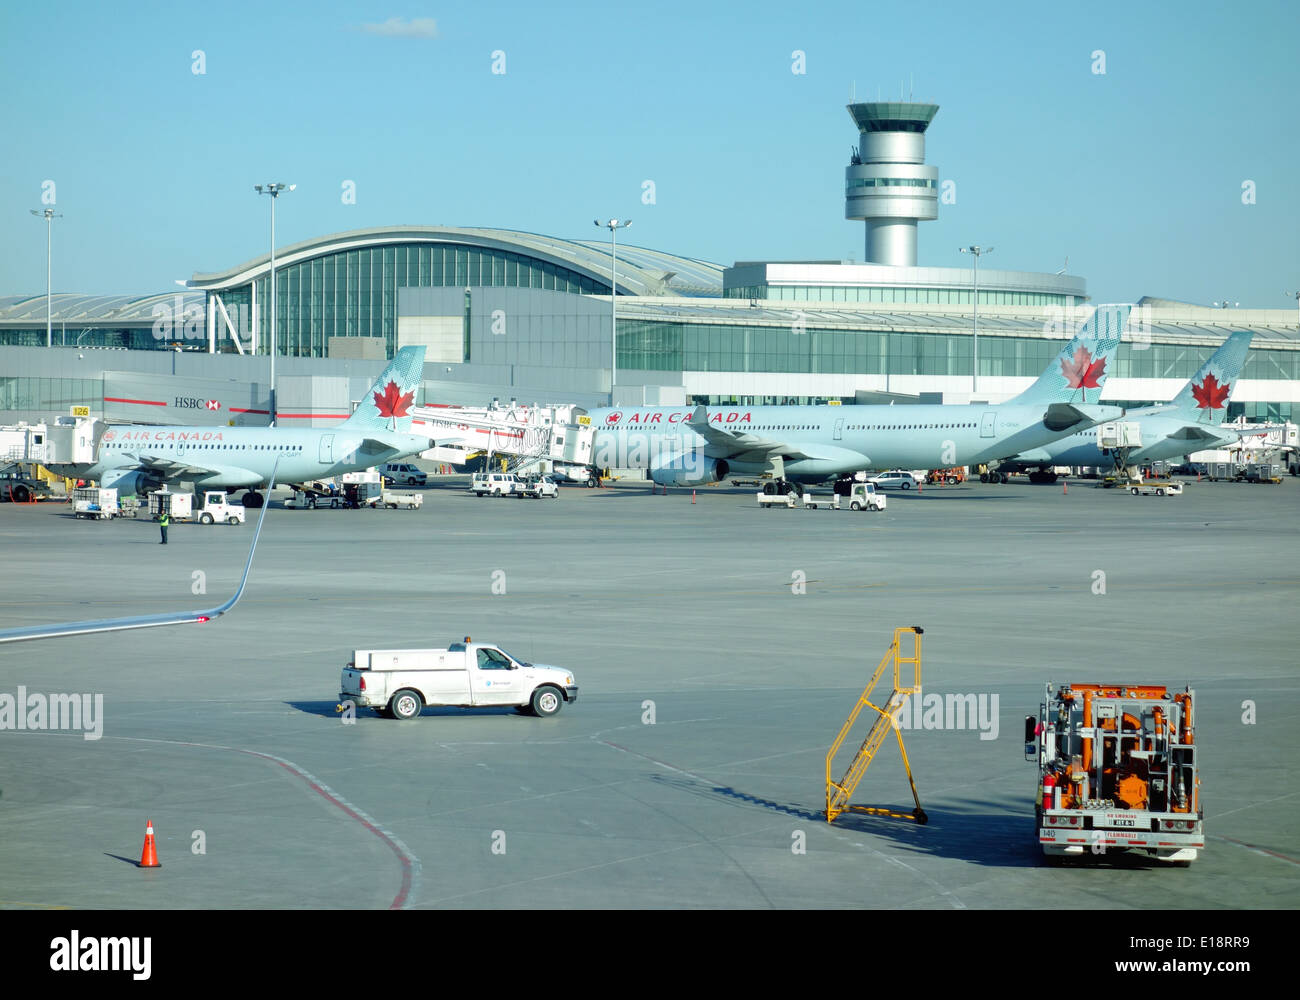 Tarmat at the Pearson Airport in Toronto, Canada Stock Photo